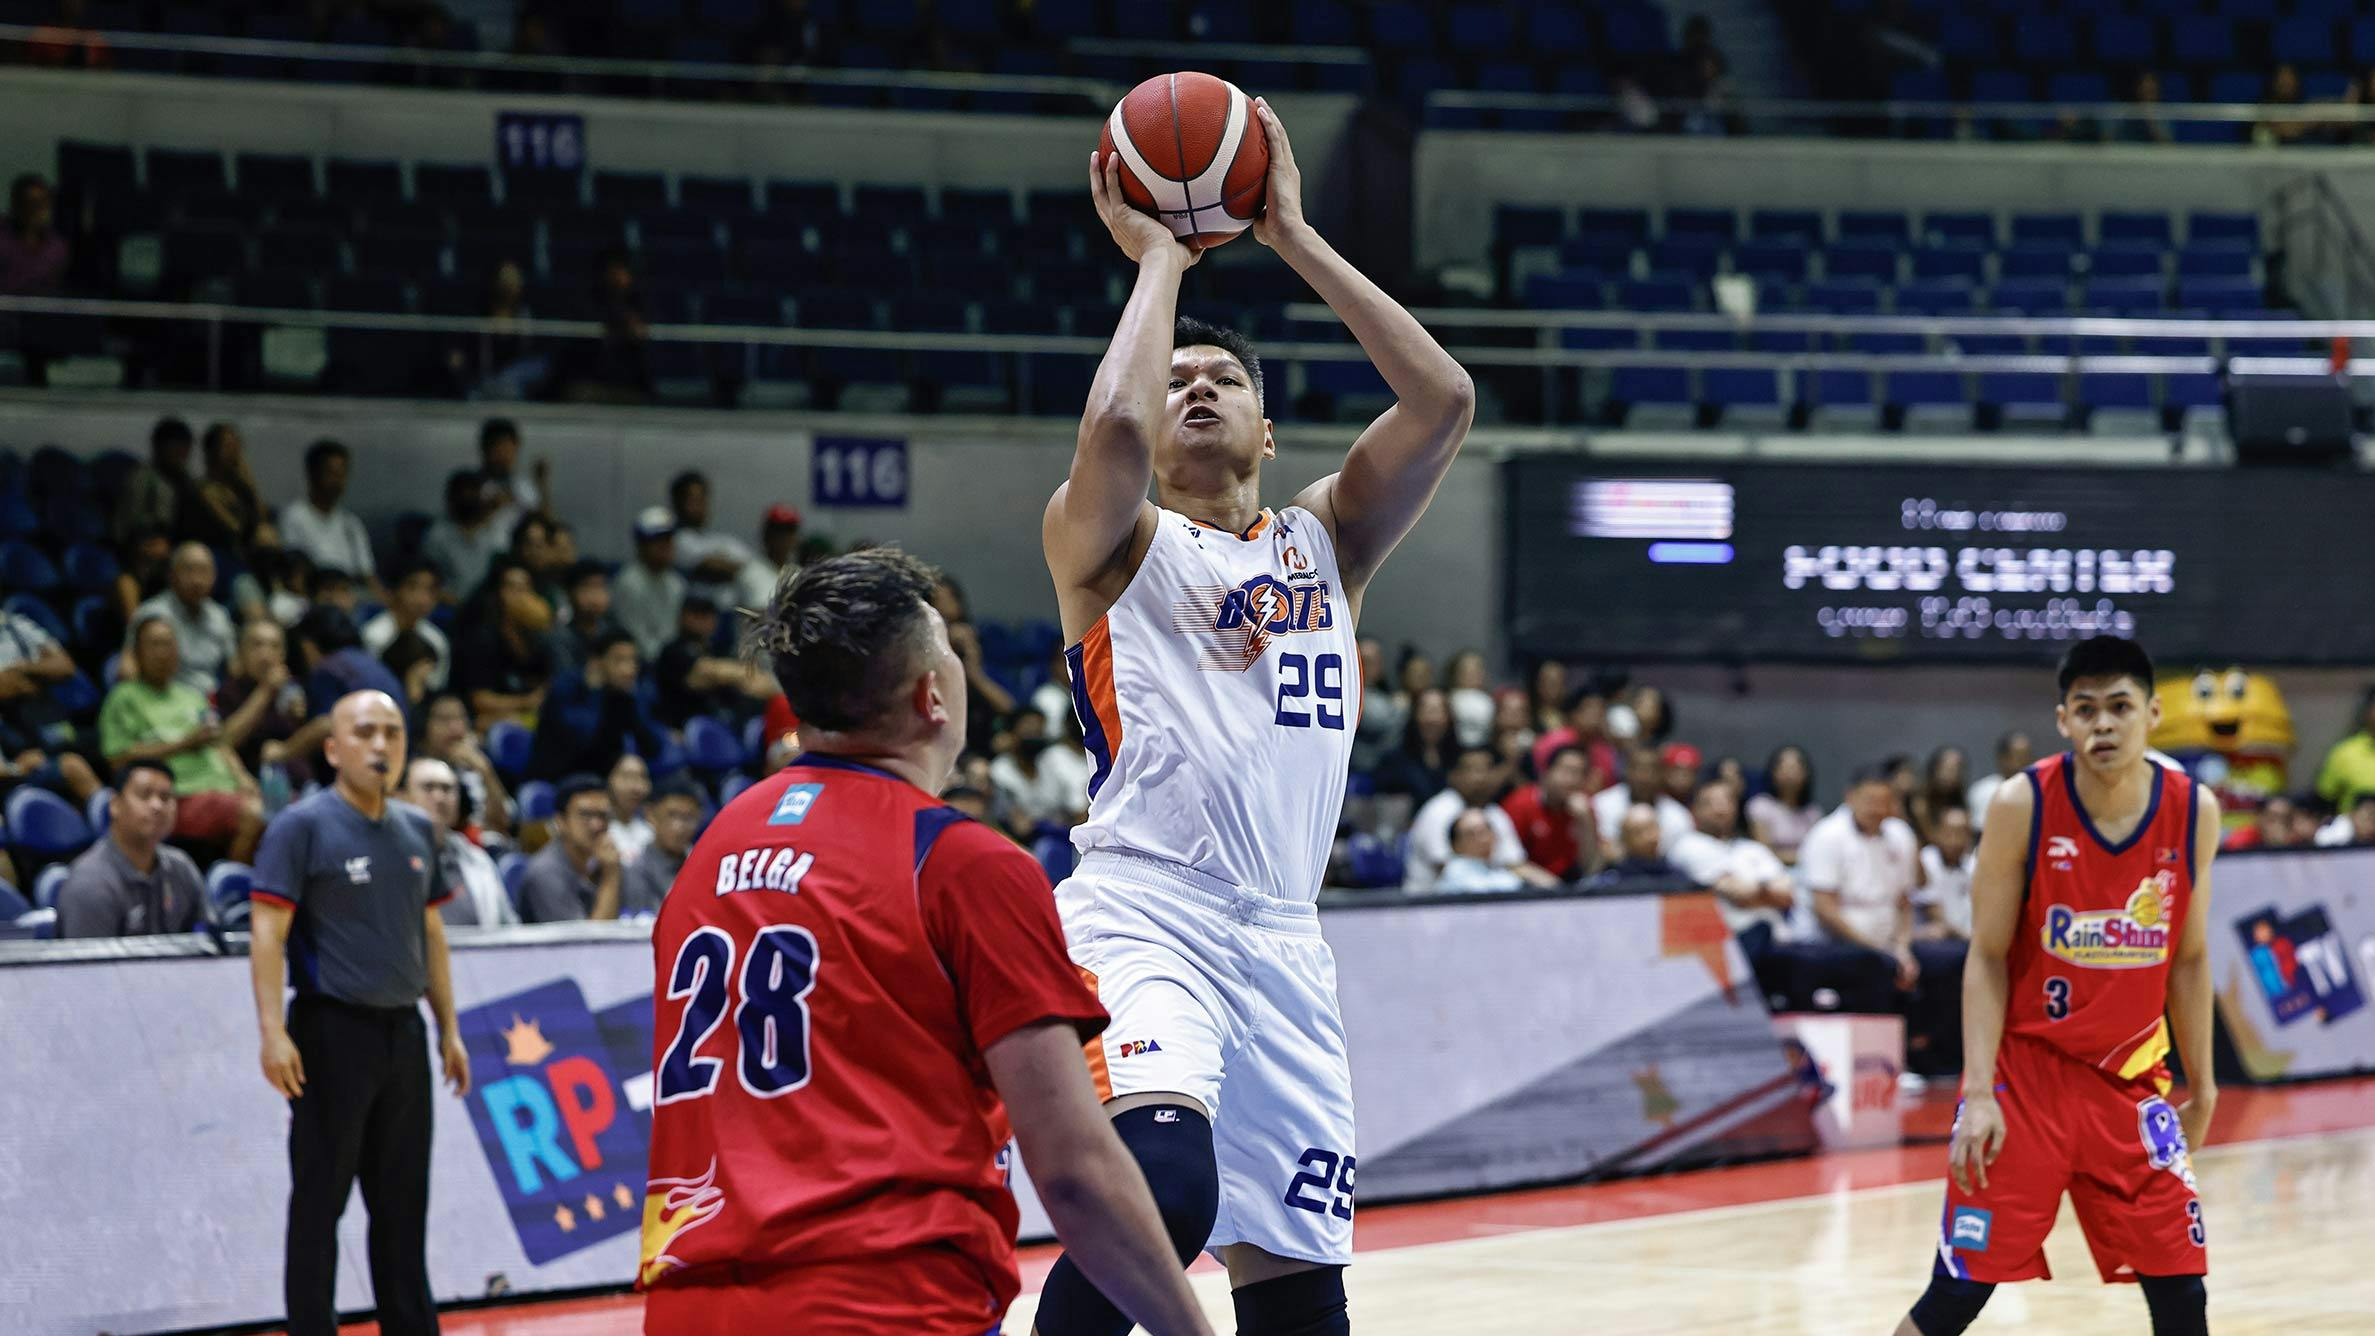 PBA: Norbert Torres steps in for injured teammates, delivers in Meralco’s win over Rain or Shine